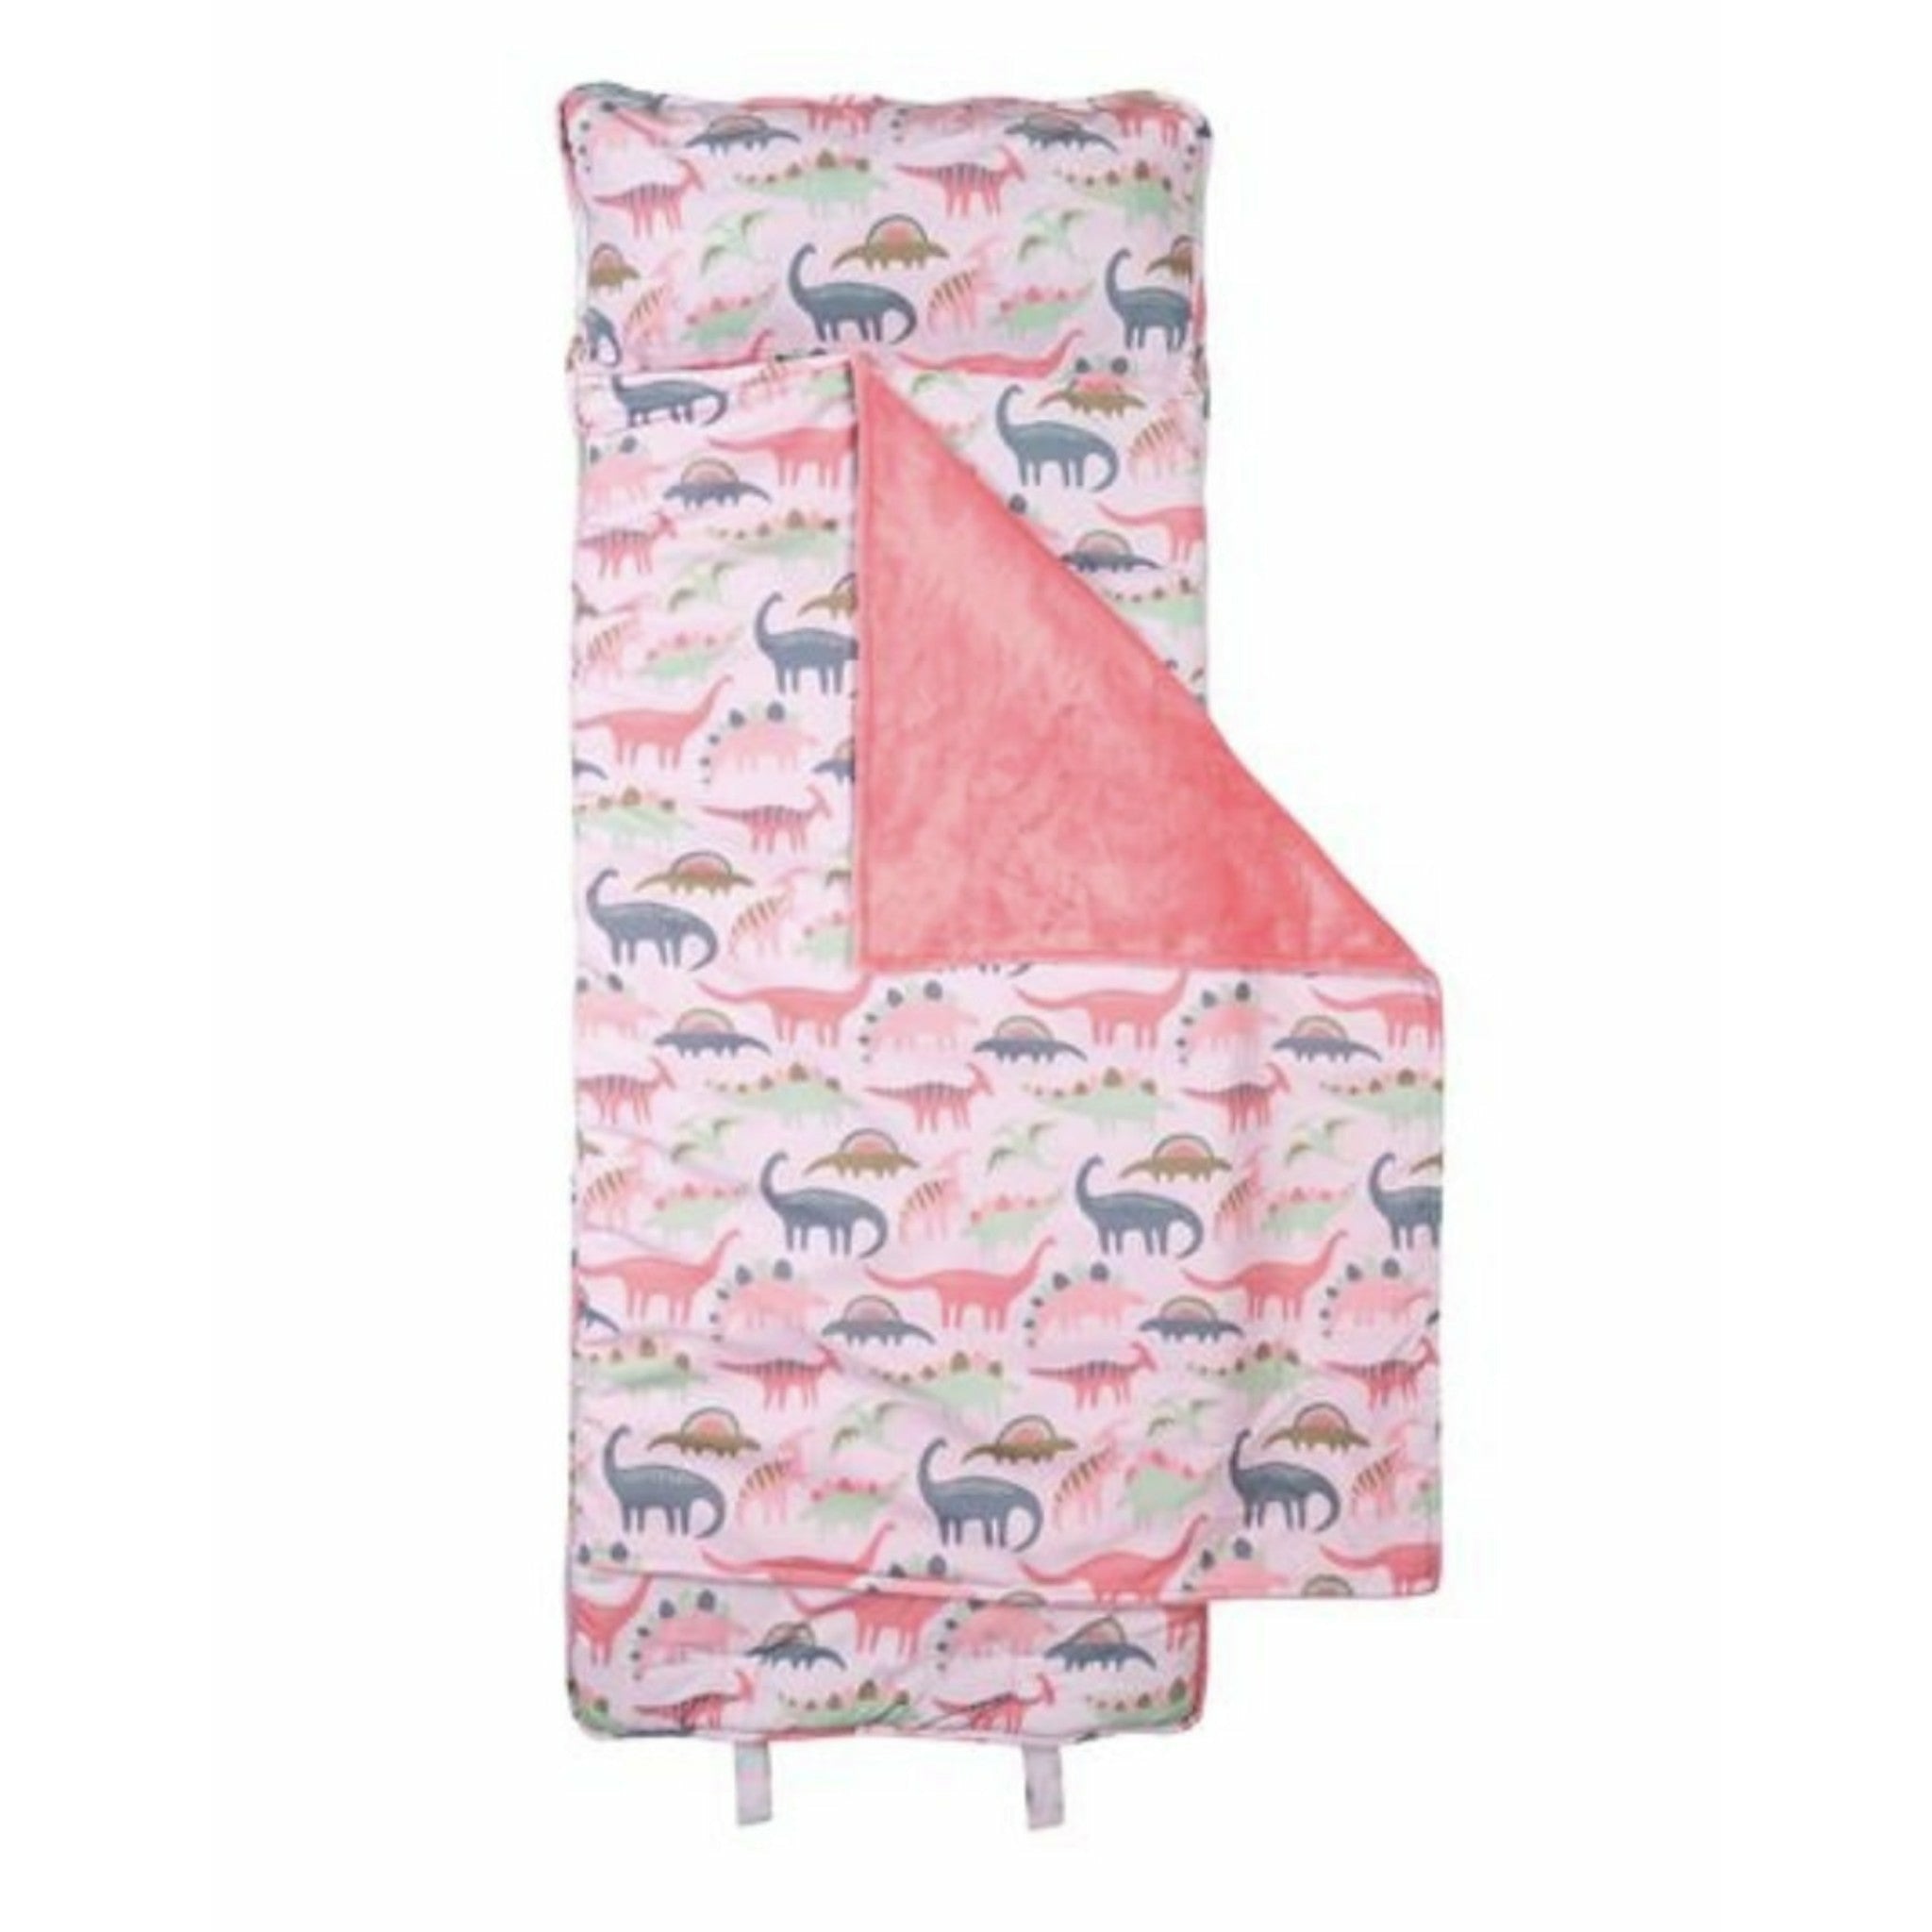 Buy pink-dinosaurs Printed All Over Nap Mat